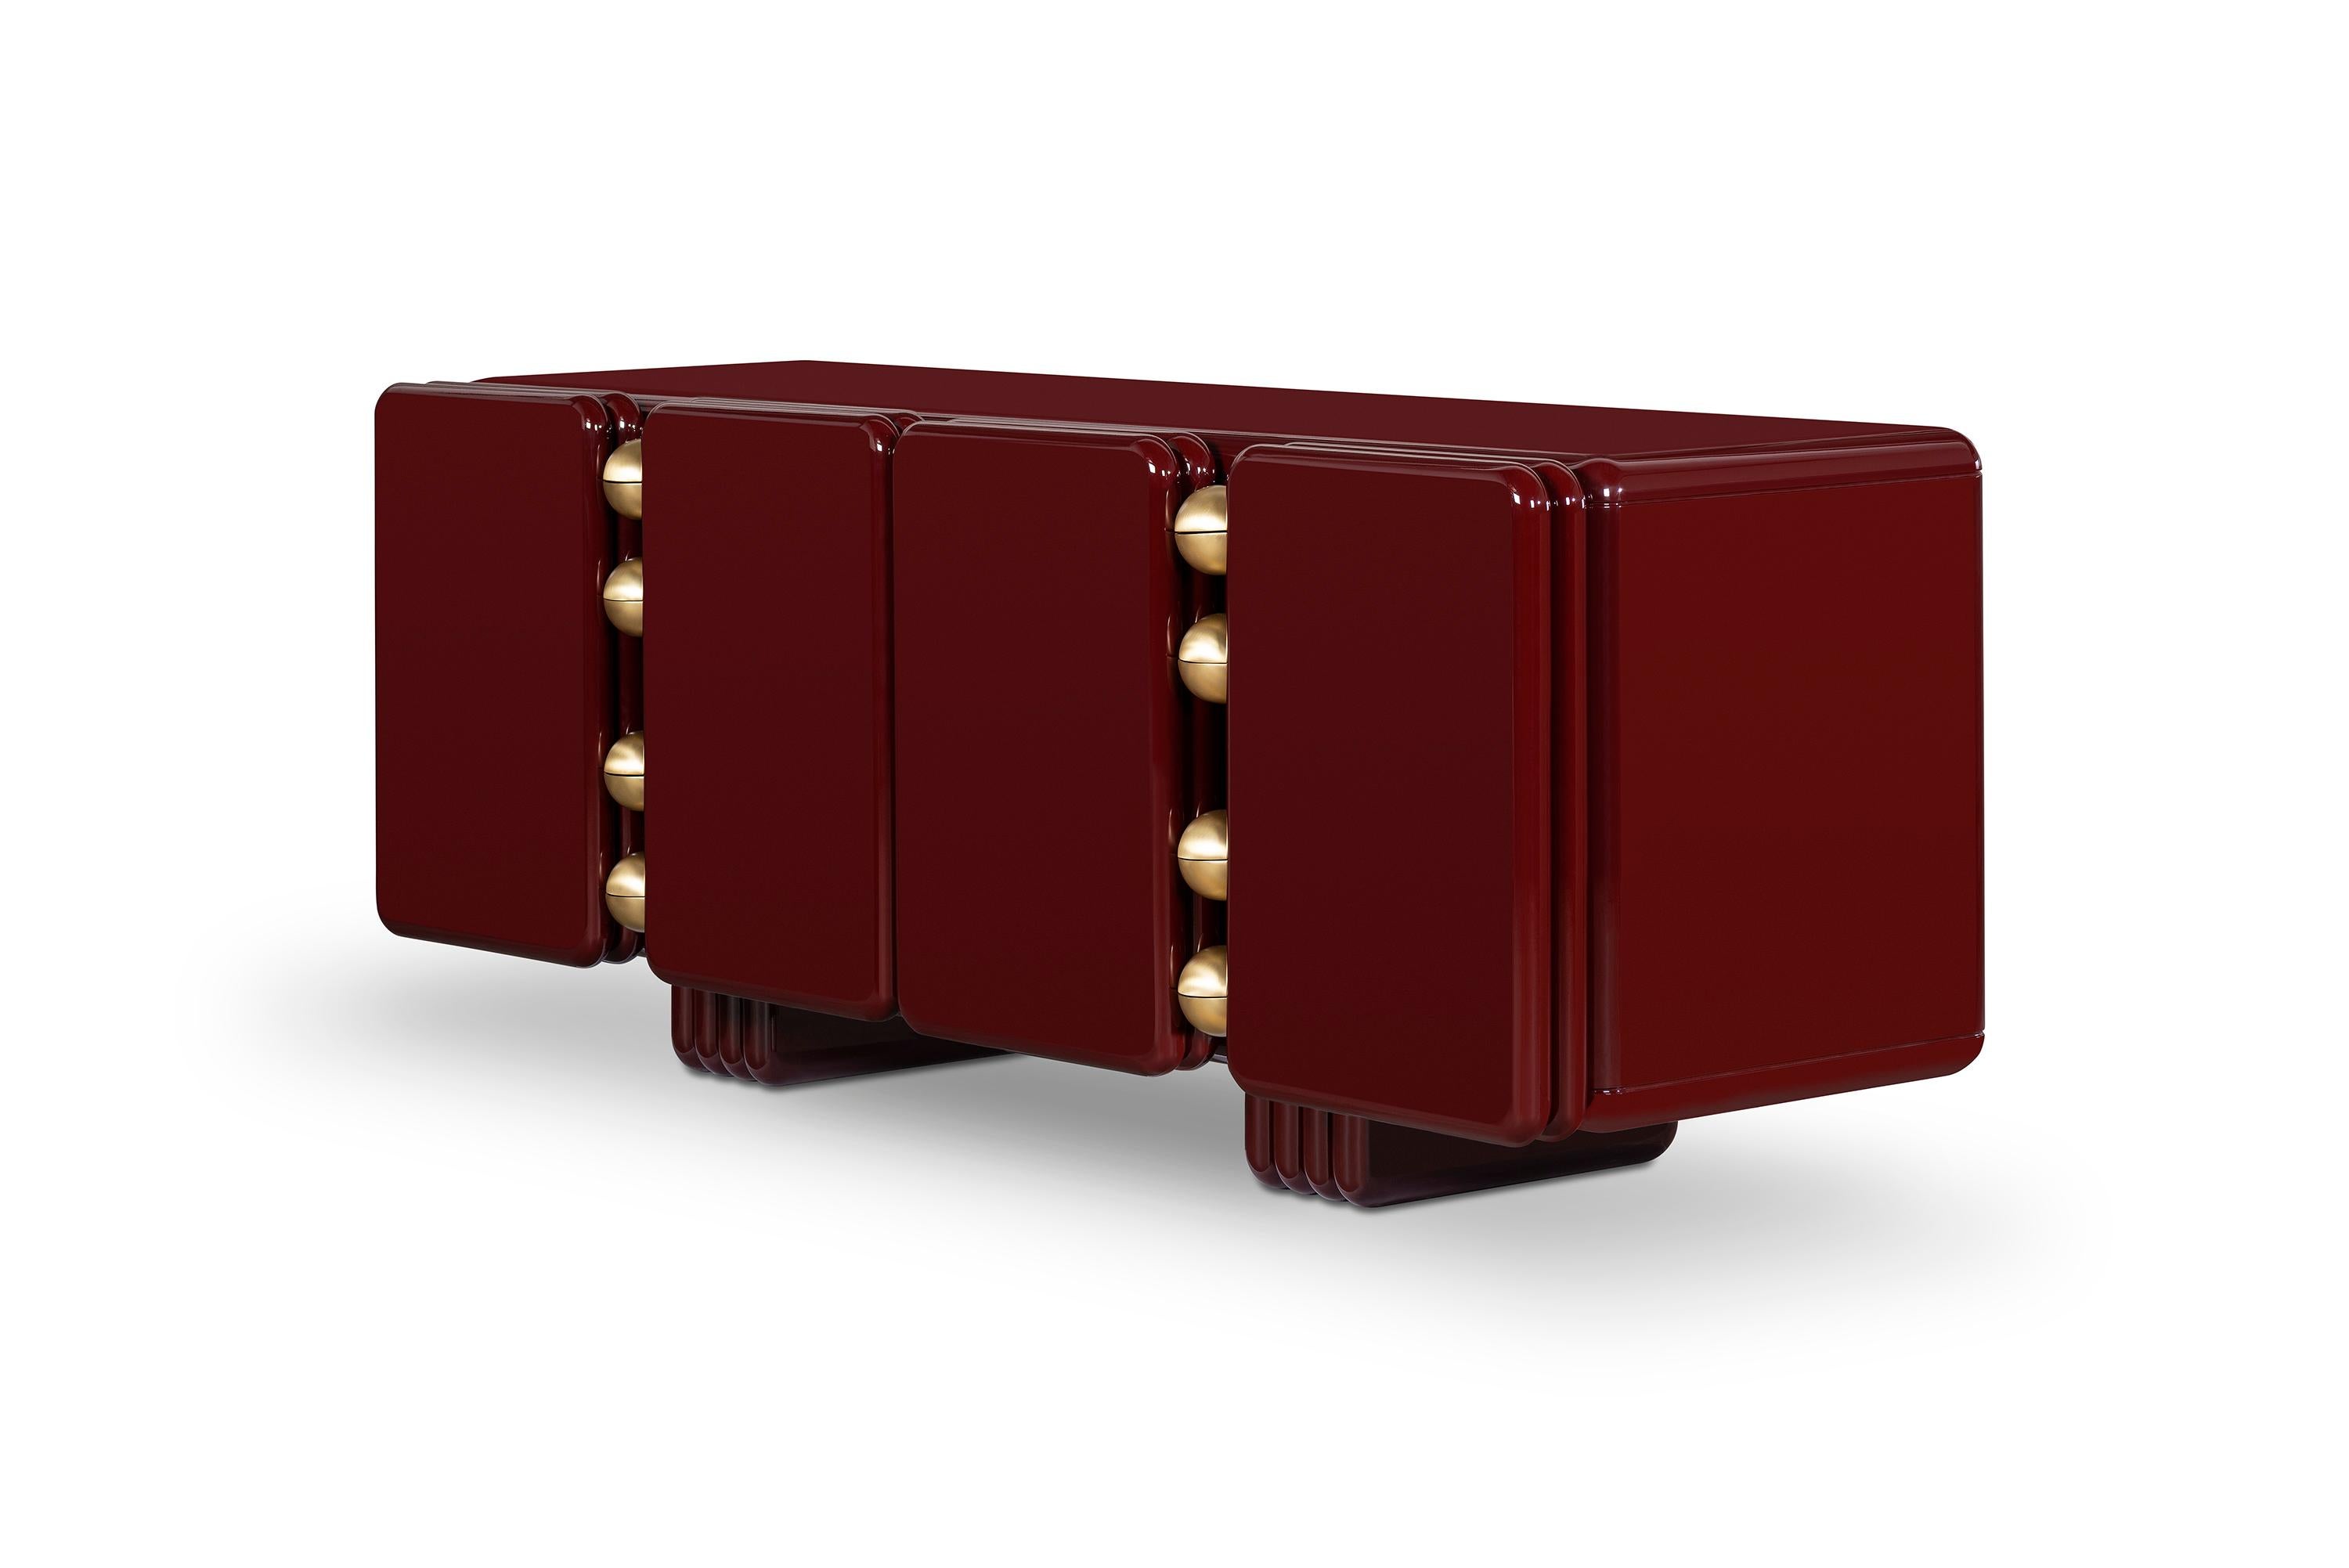 Monolithic sideboard, Royal Stranger
Dimensions: W 220 x D 70 x H 84 cm
Materials: Body cherry red lacquered with glossy finish
 Door hinges brushed brass
Weight: 253 kg 

Finish options
Body available in all NCS/RAL colors with matte or